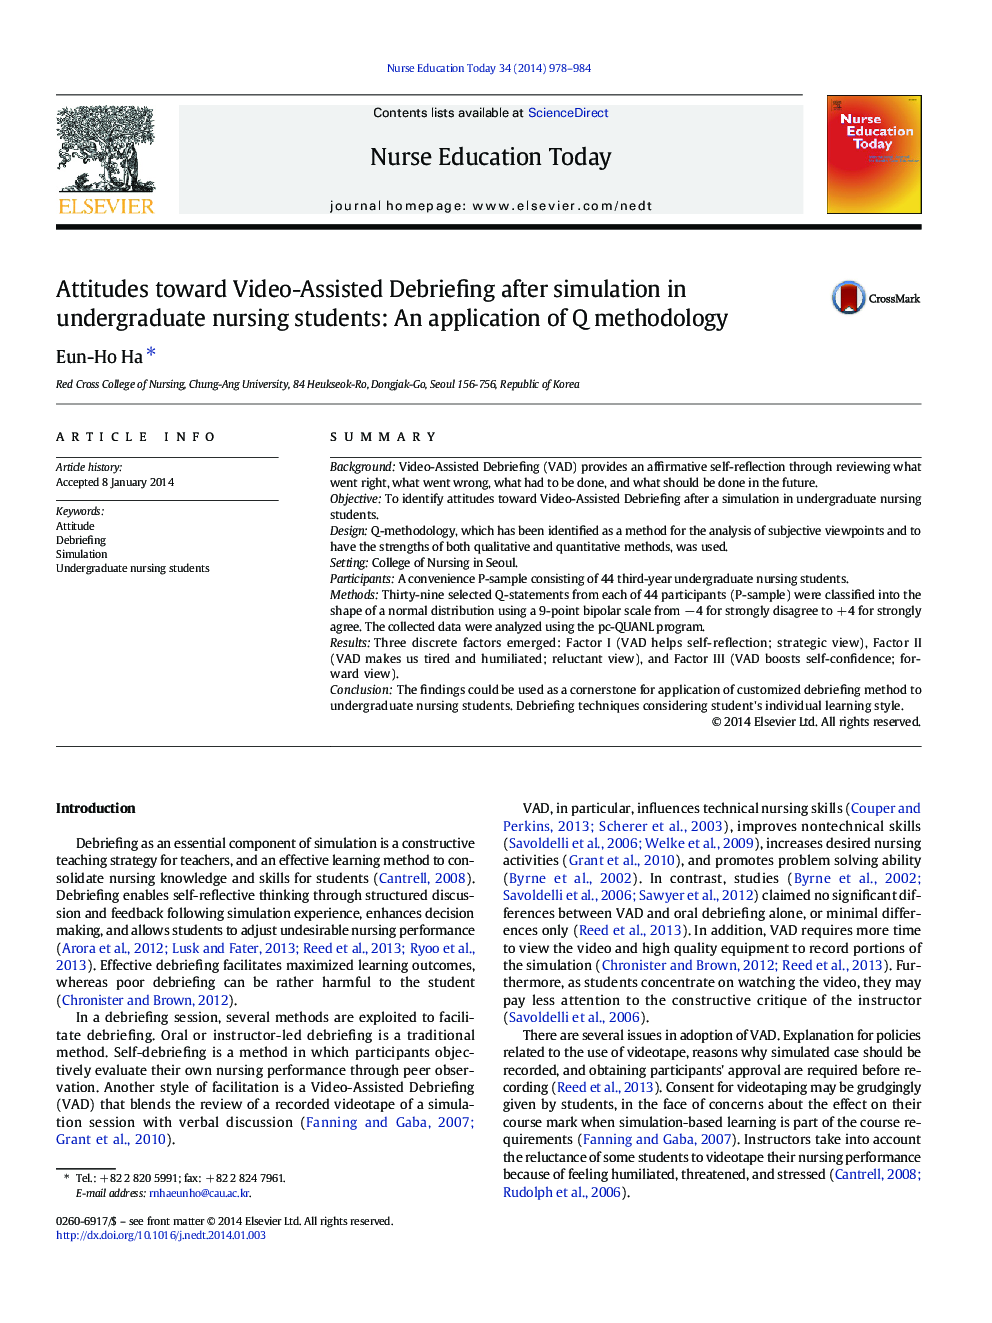 Attitudes toward Video-Assisted Debriefing after simulation in undergraduate nursing students: An application of Q methodology